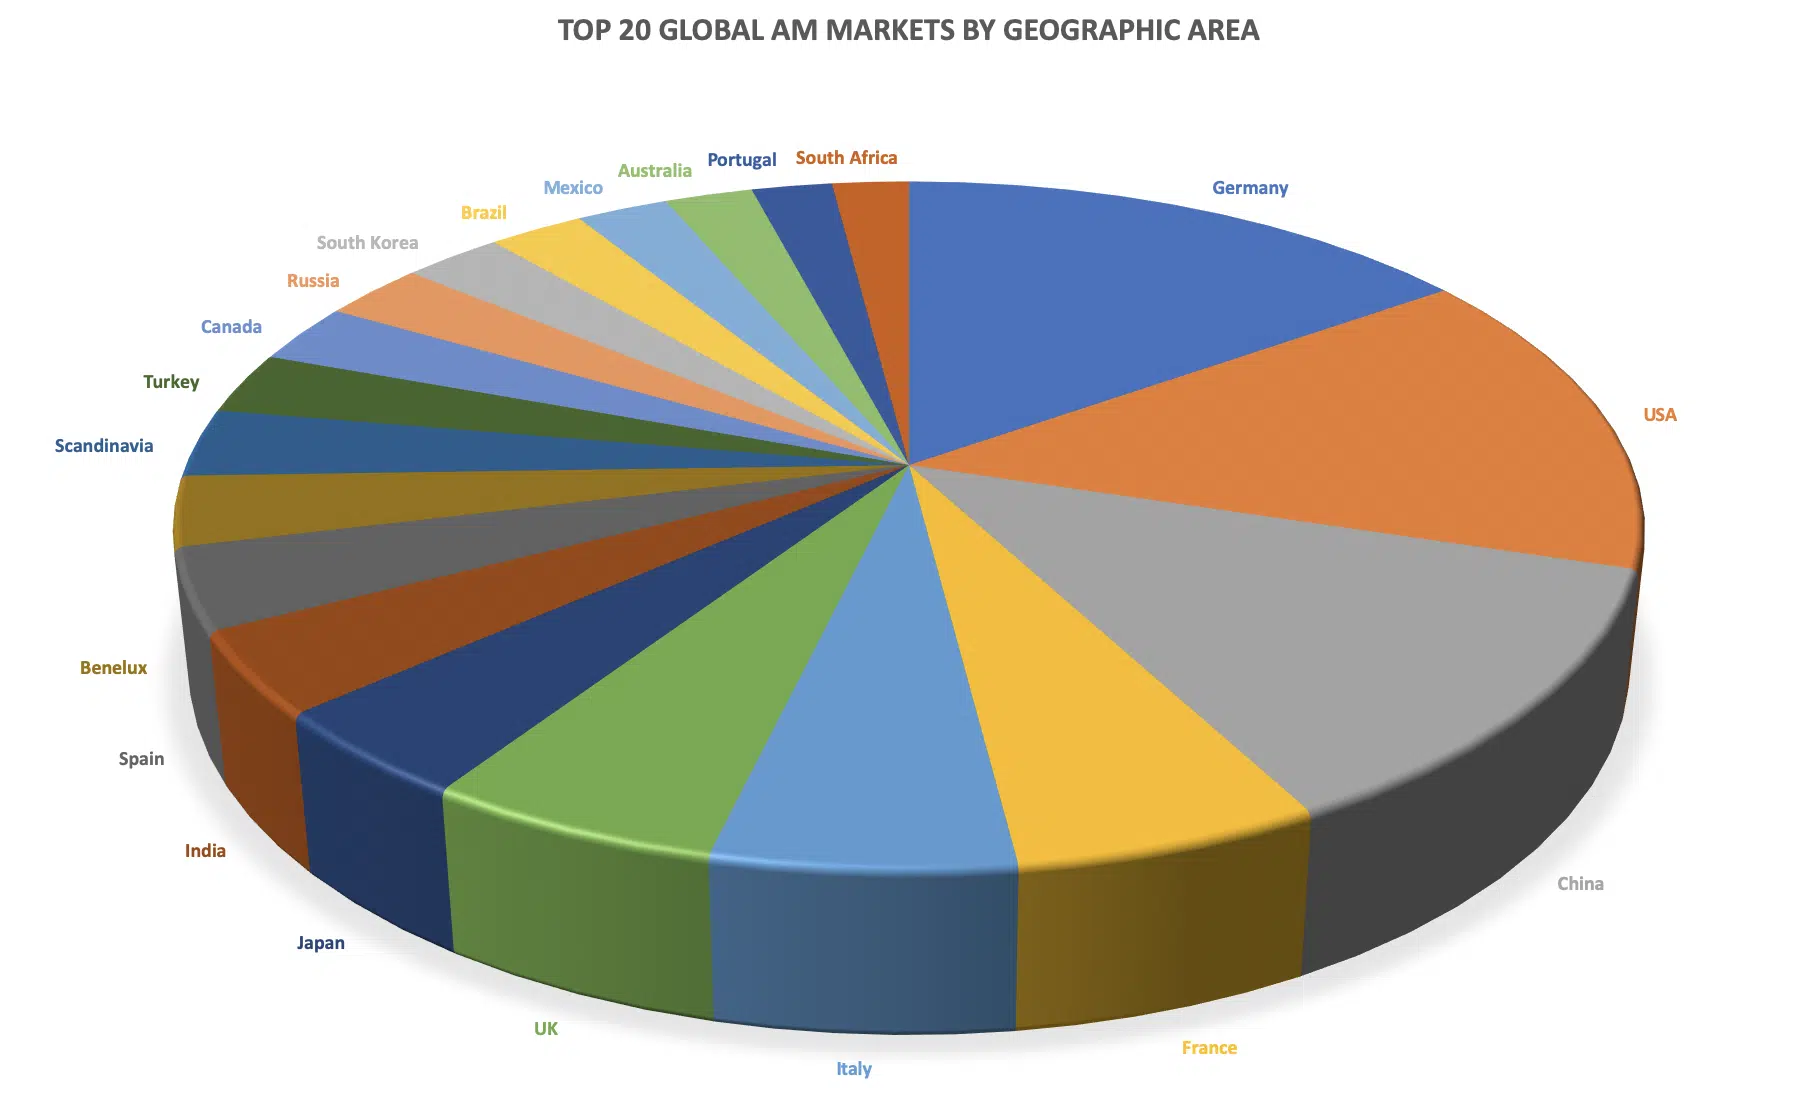 The top 20 global Additive Manufacturing markets